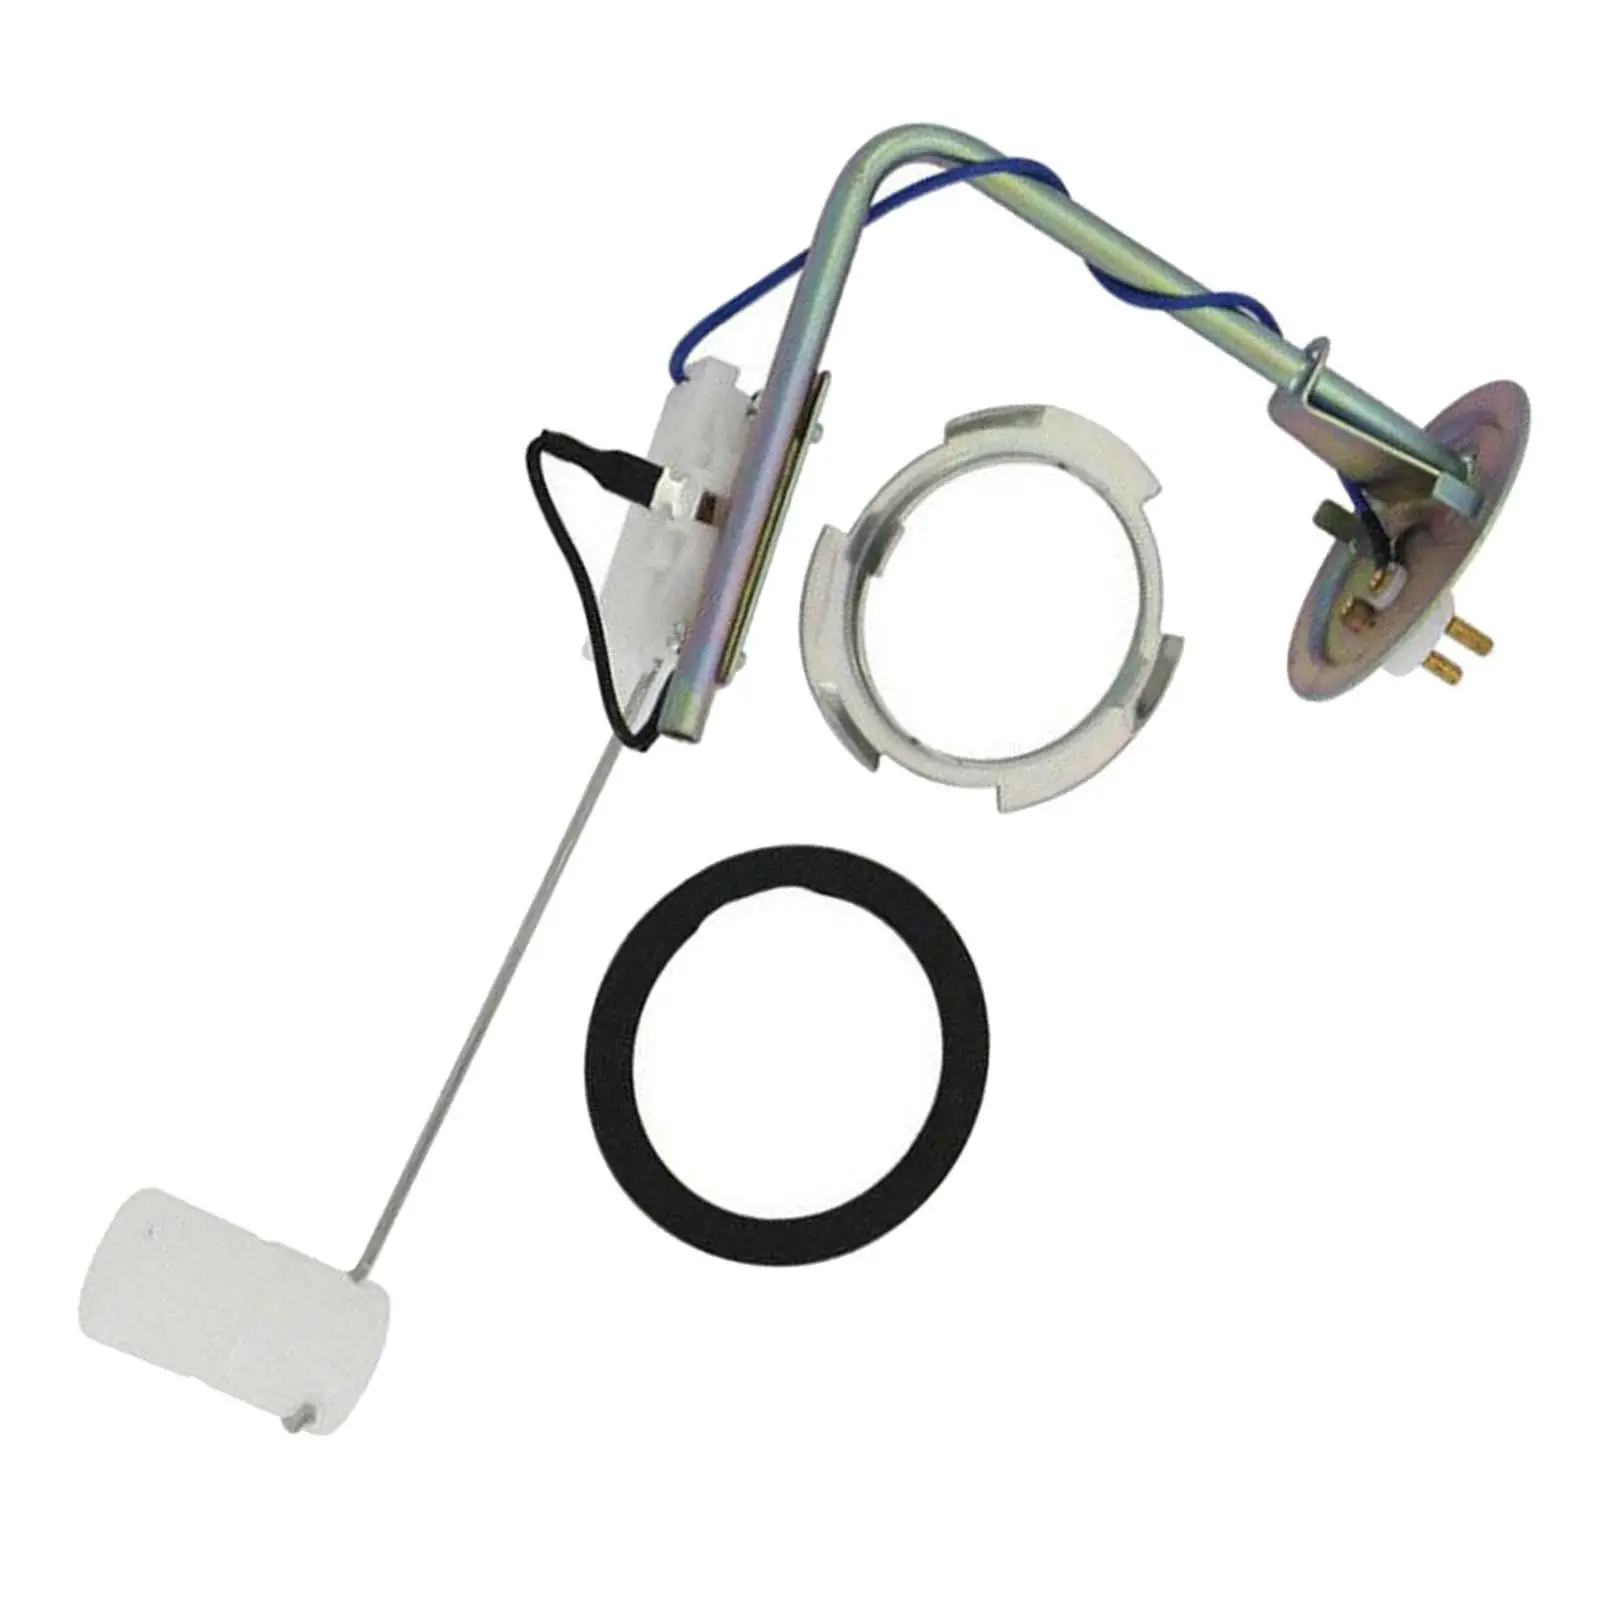 Fuel Pump Sender Spare Parts Assembly for Lincoln Mercury 1980-1989